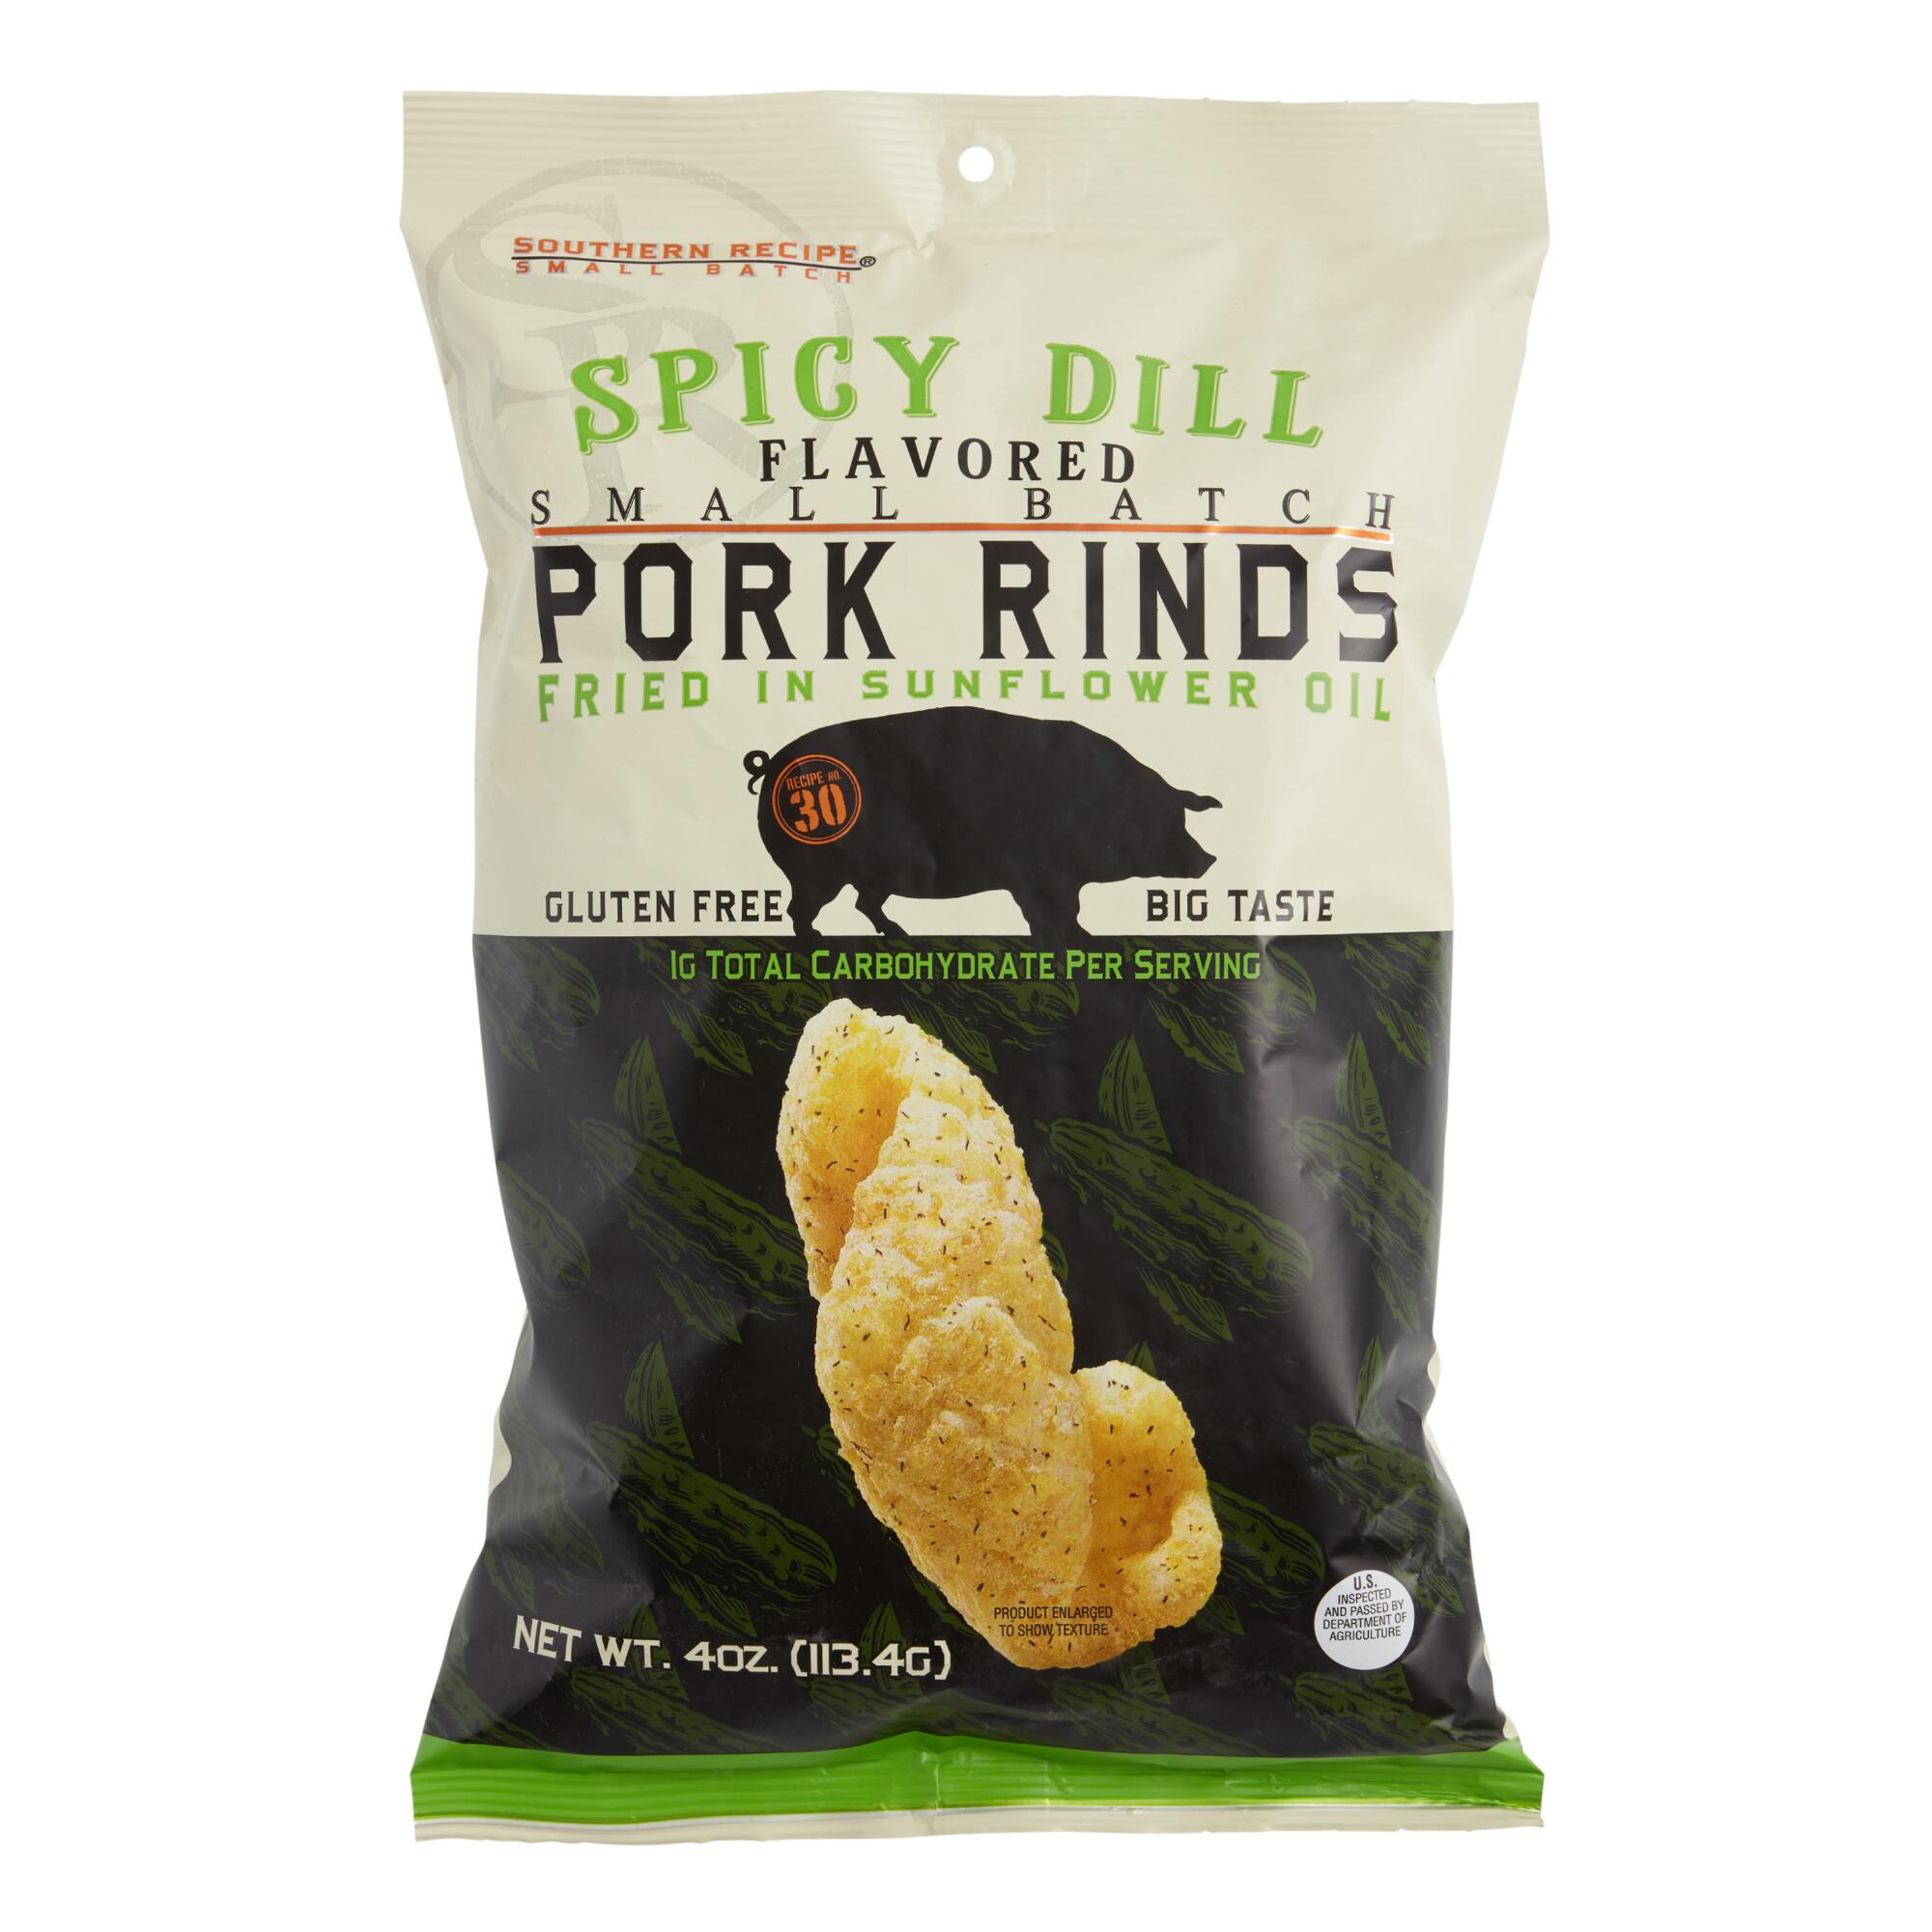 Southern Recipe Spicy Dill Pork Rinds Set of 12 by World Market